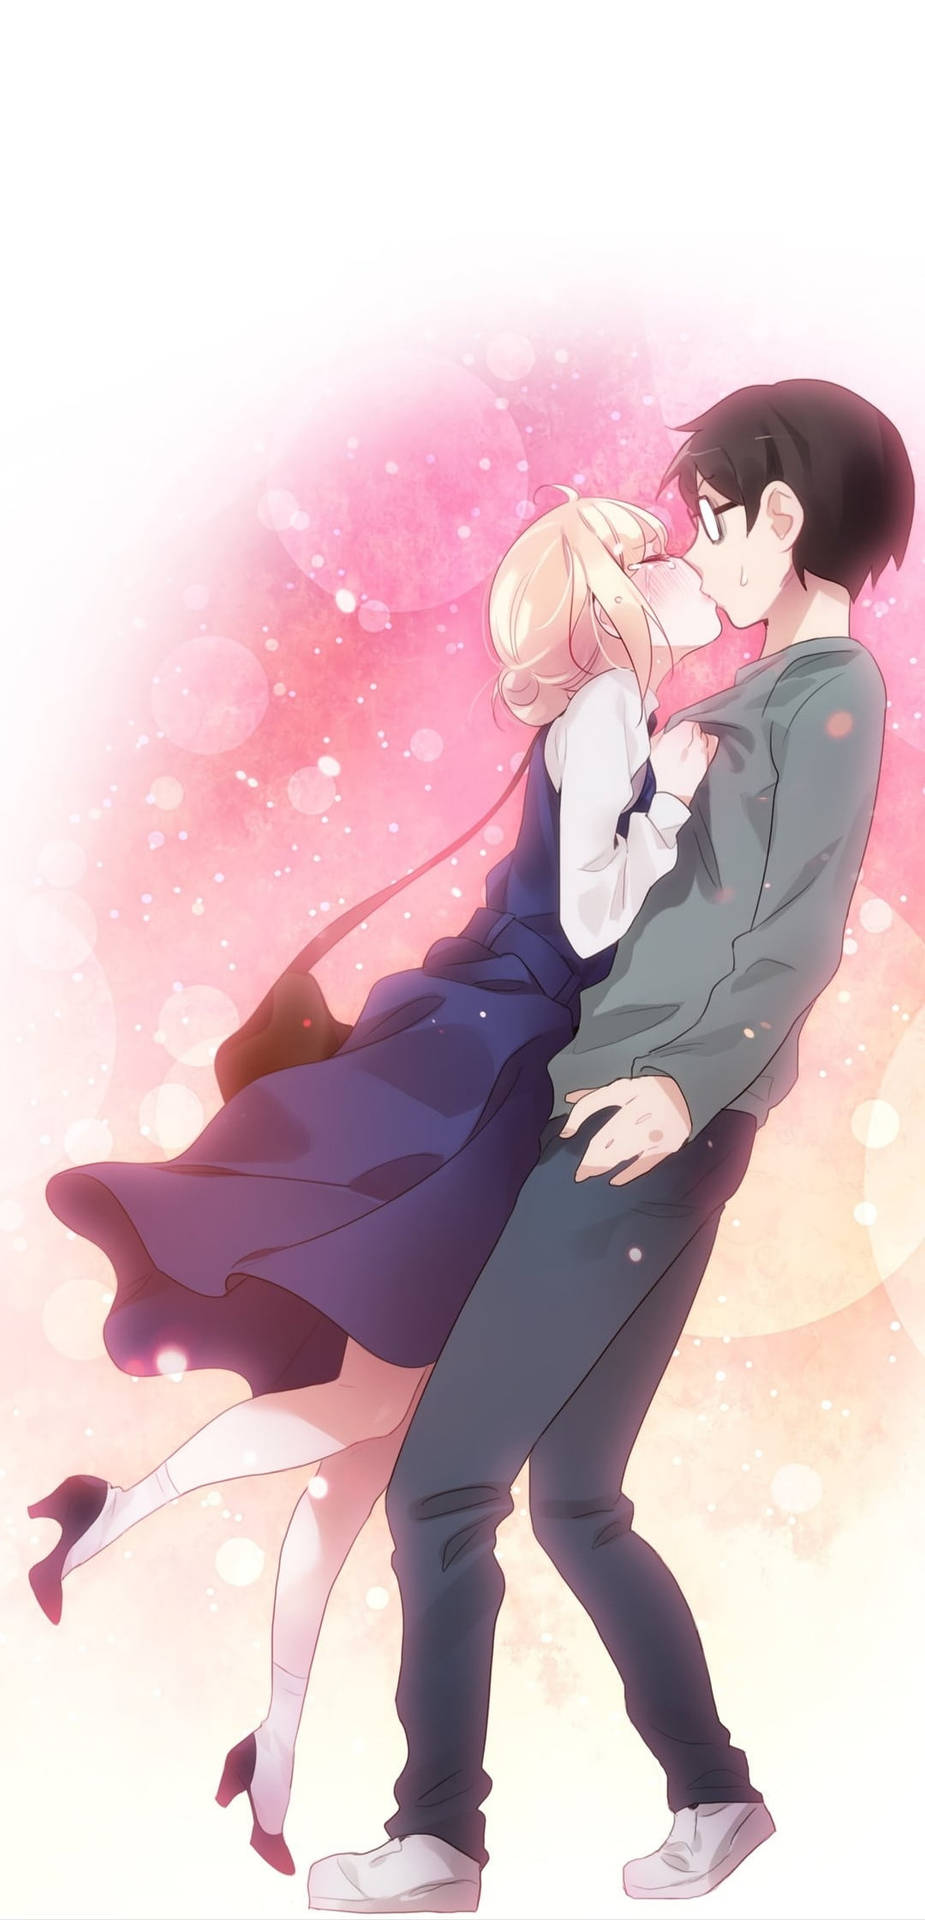 Download Passionate Anime Couple Kiss Phone Wallpaper